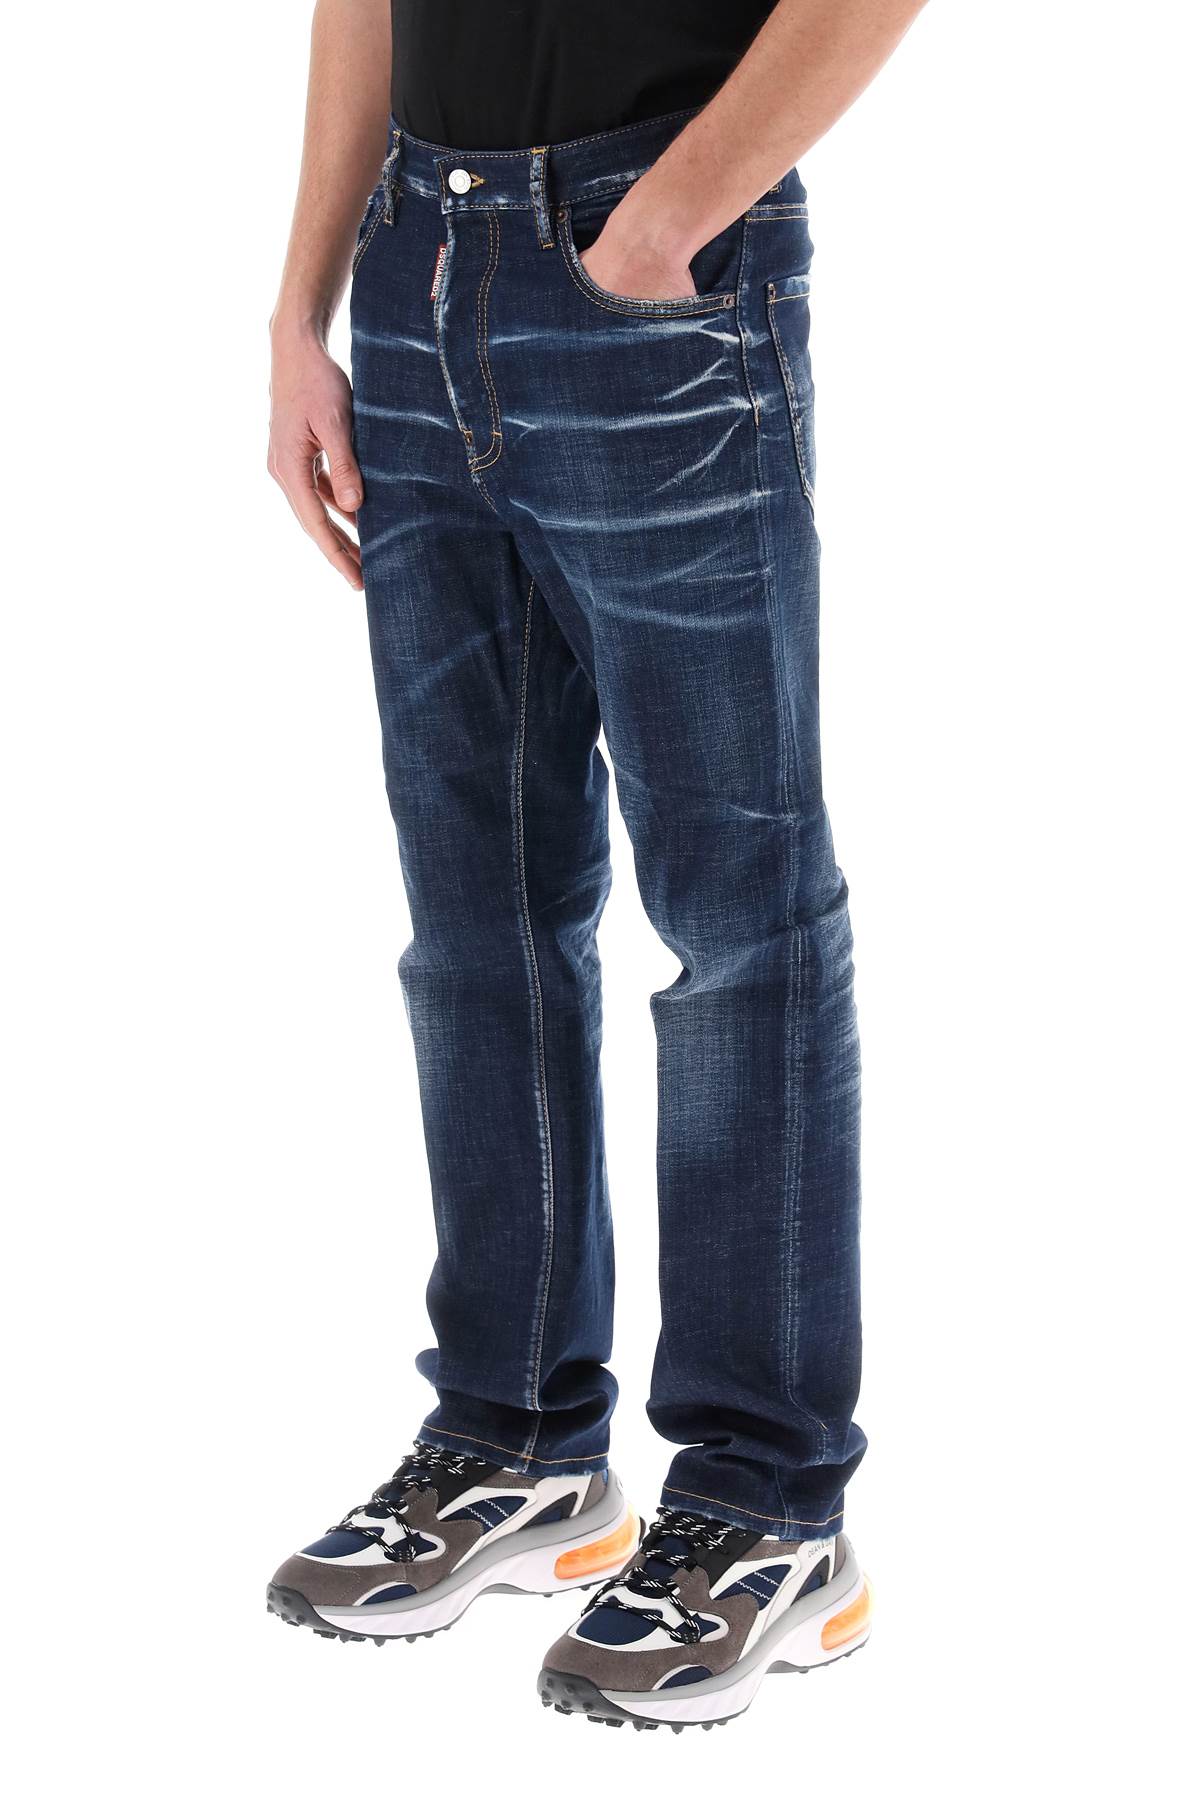 Dsquared2 Dsquared2 642 jeans in dark clean wash